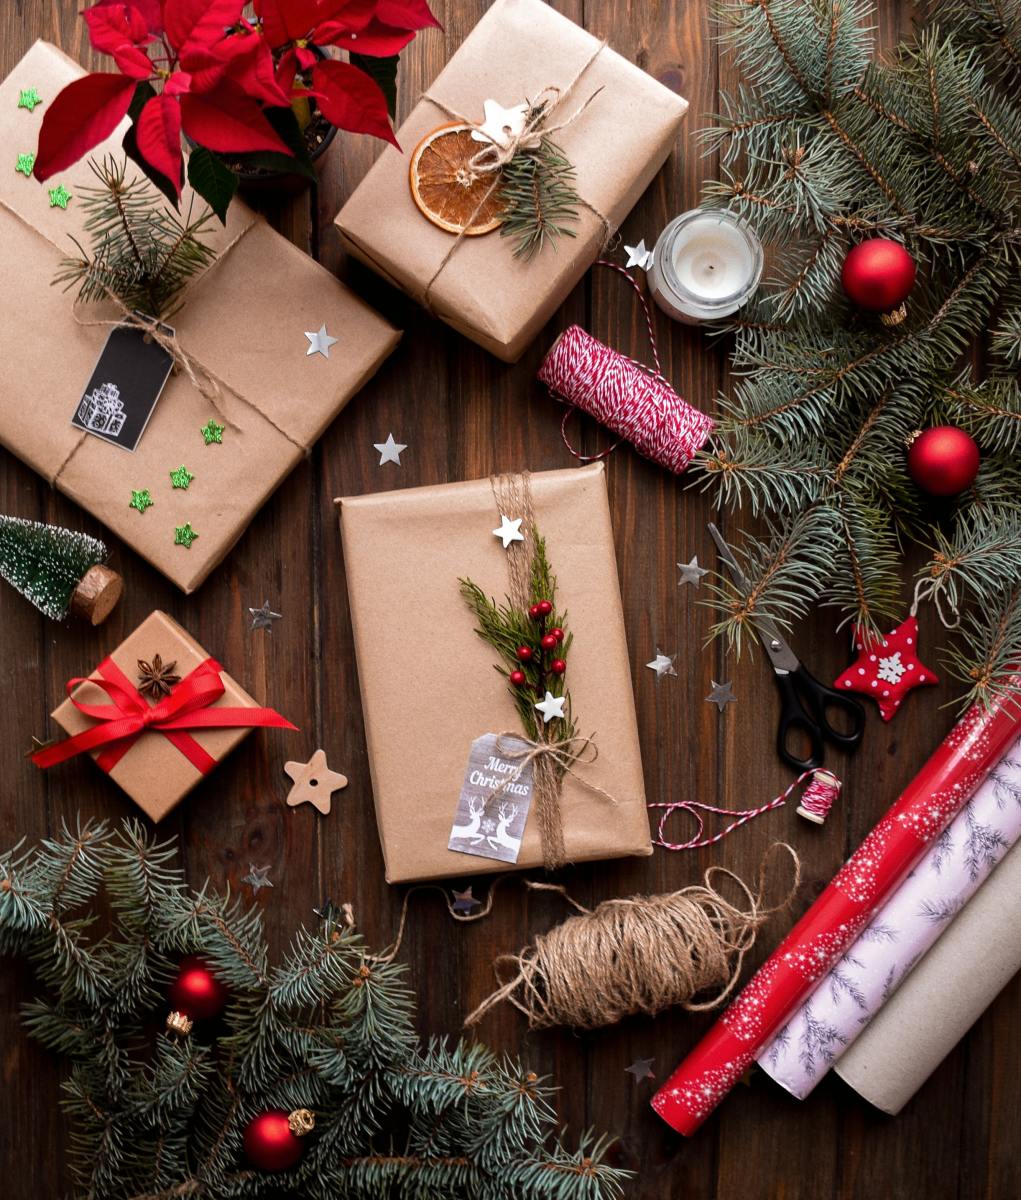 7 Ways to Reduce Your Christmas Expenses